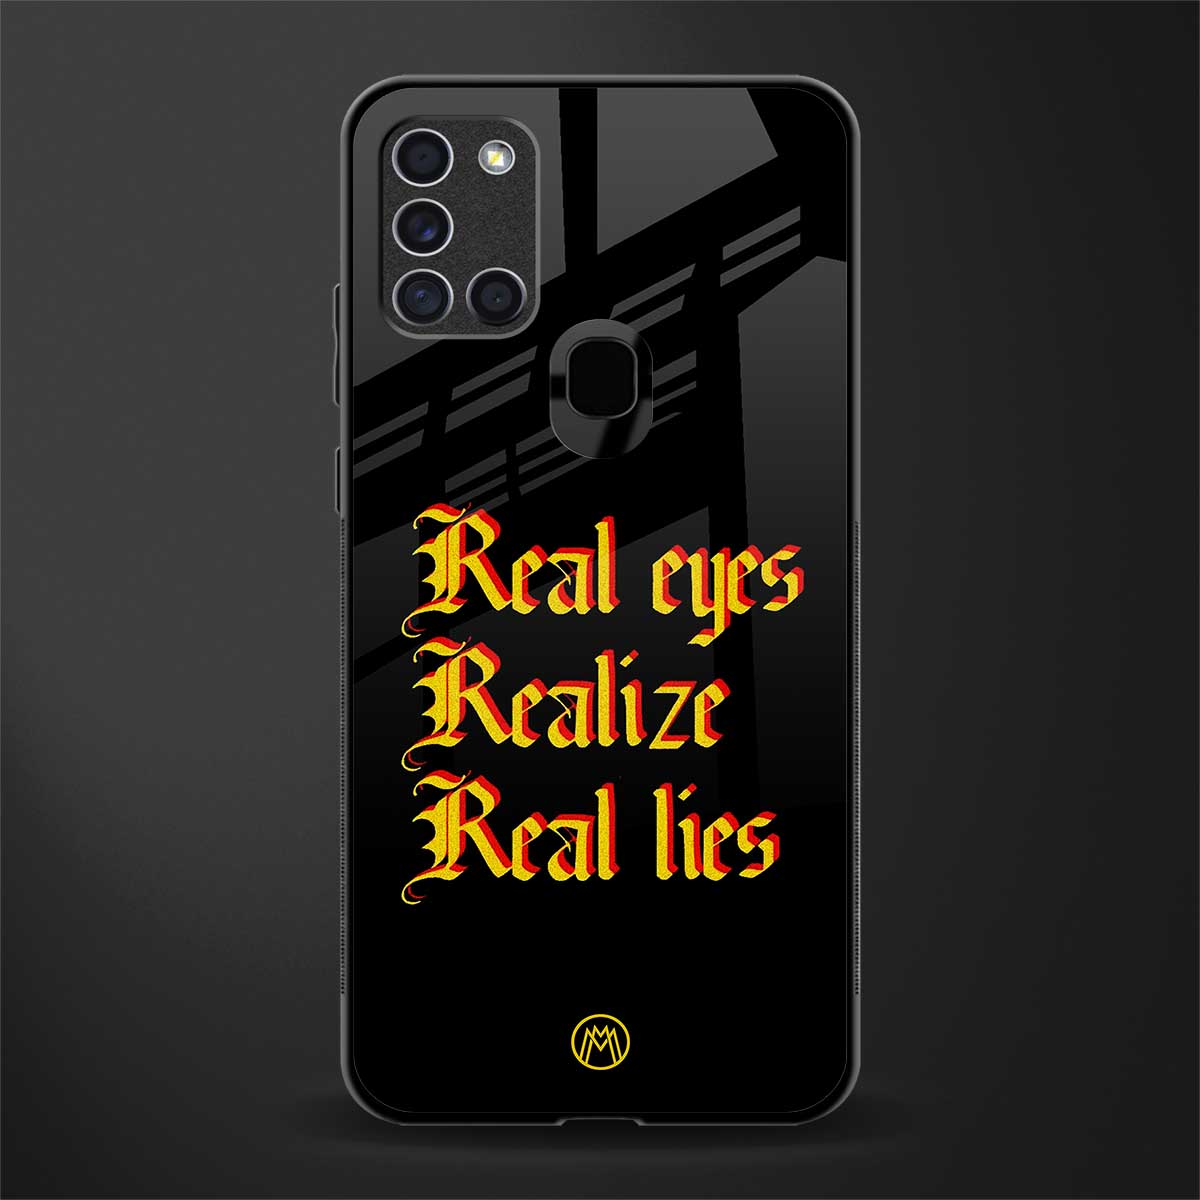 real eyes realize real lies quote glass case for samsung galaxy a21s image